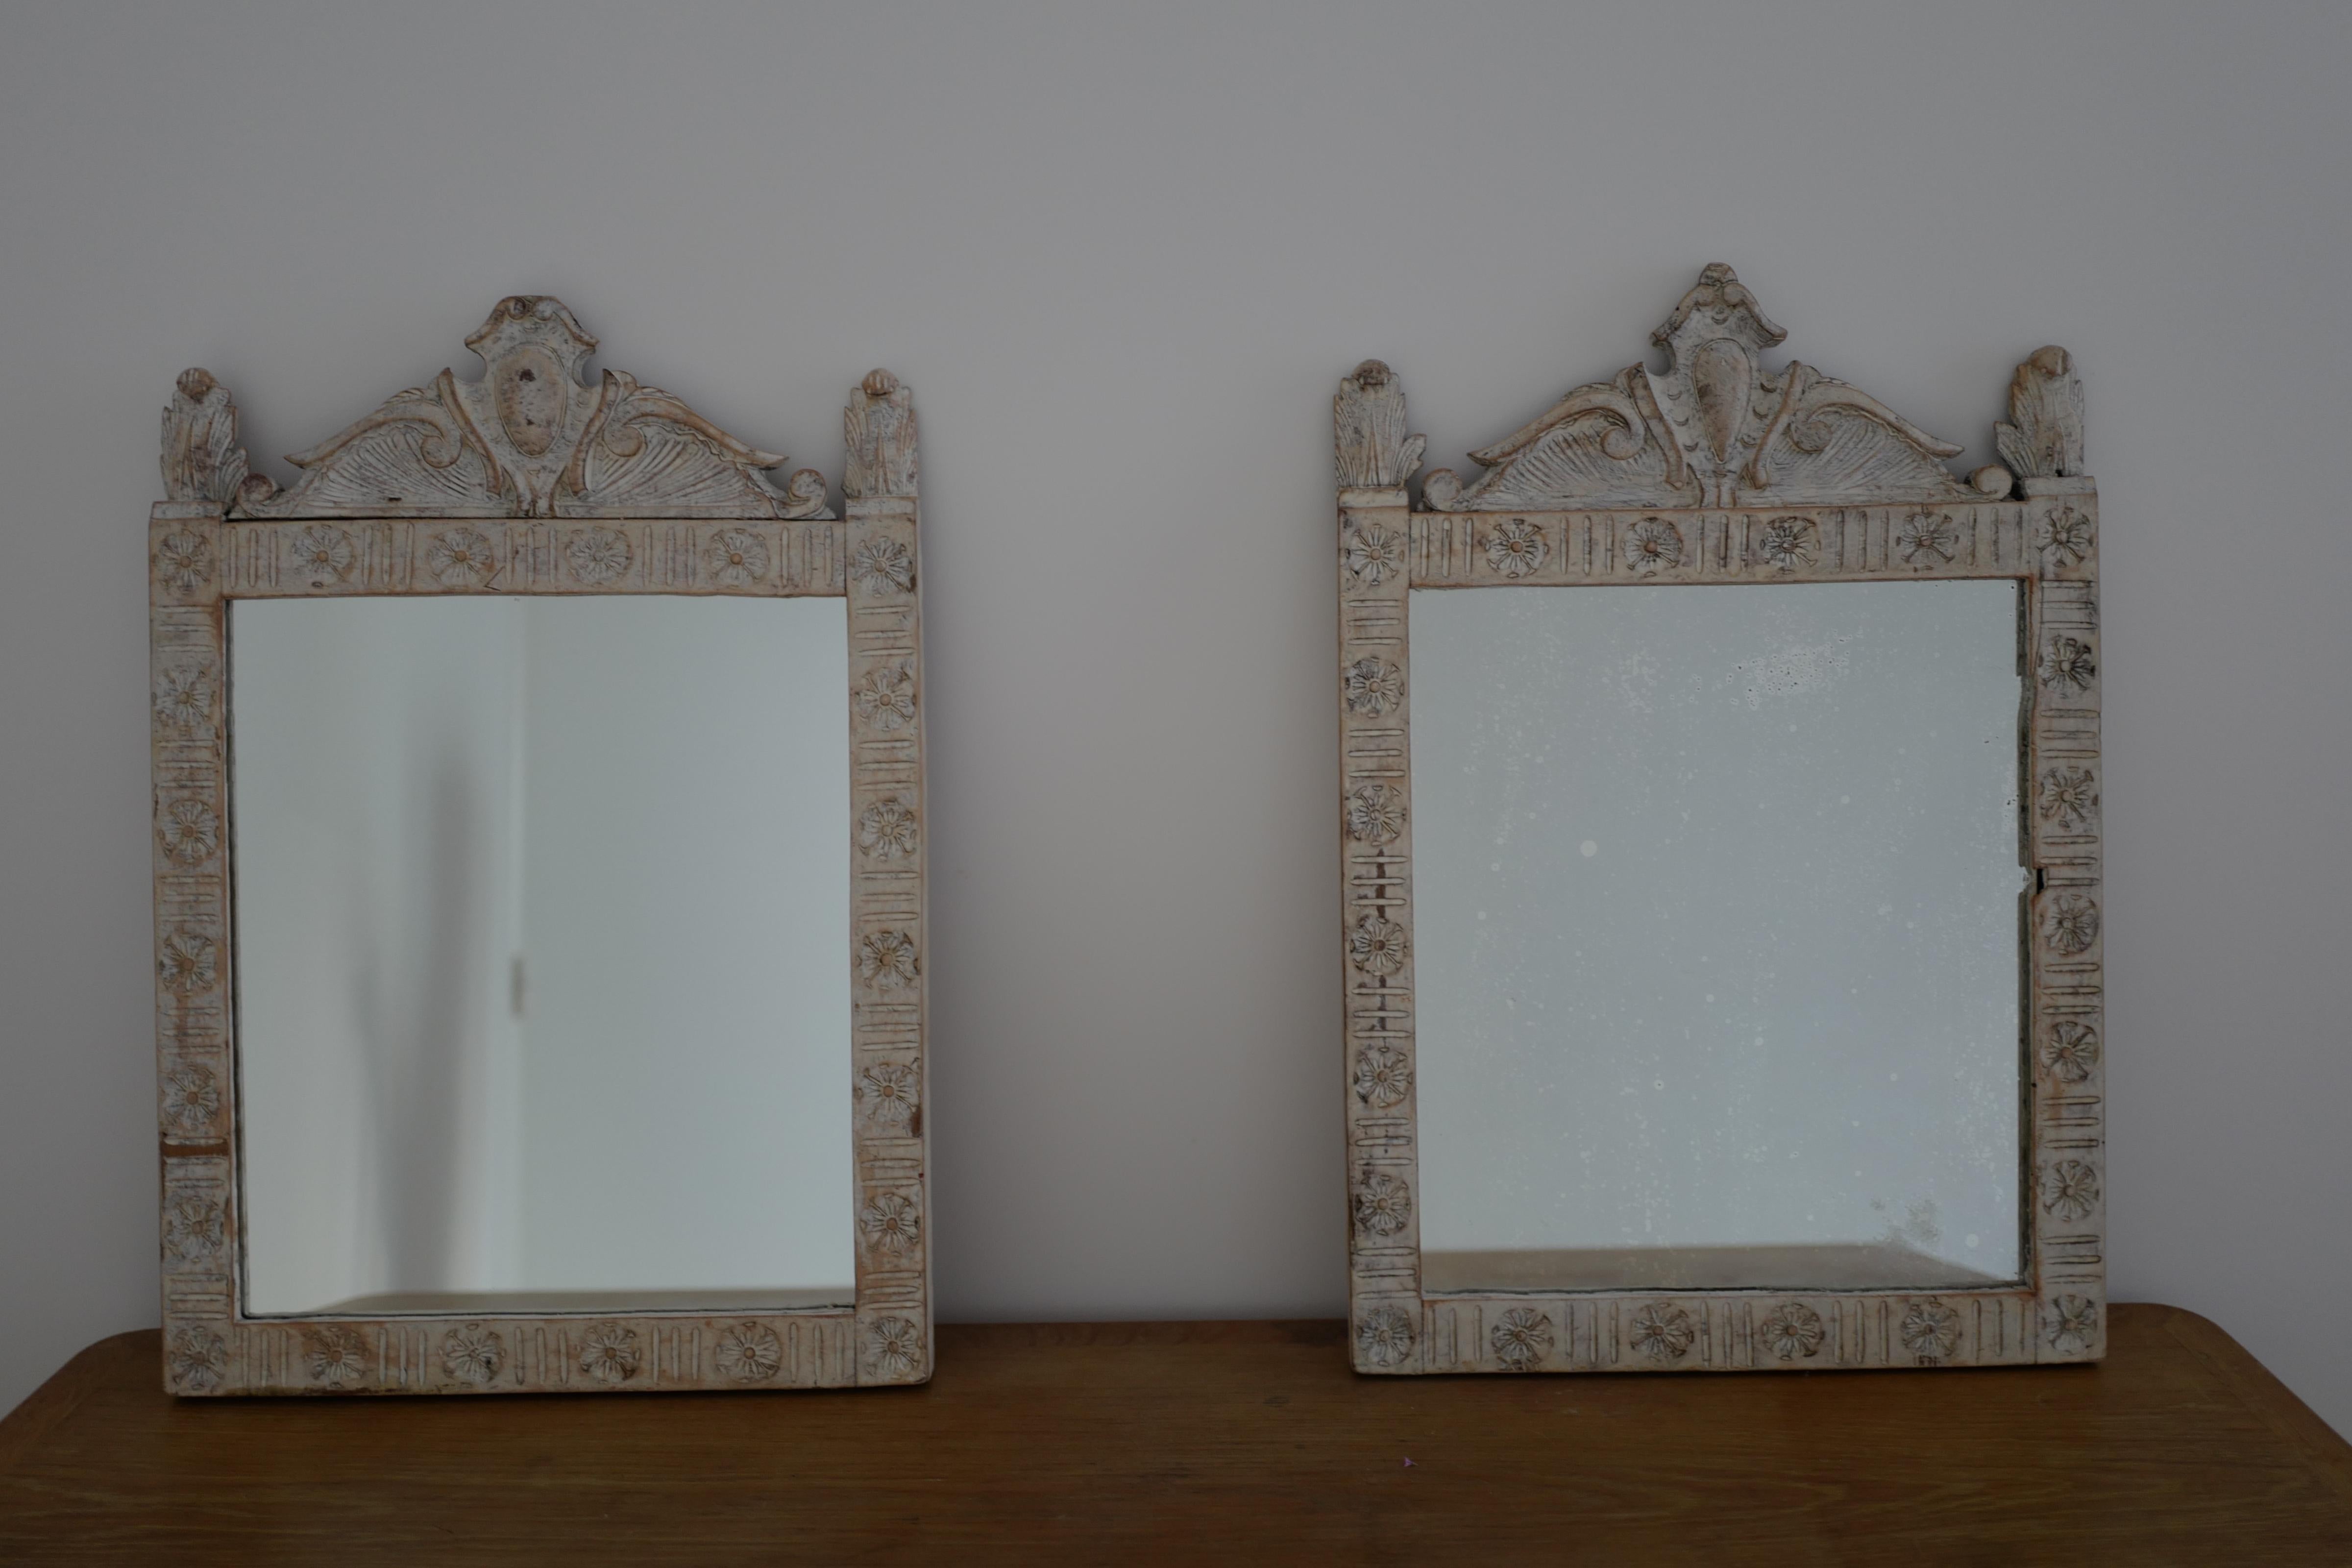 A pair of 18th century Italian Firenze painted gilt wood mirrors in white. Original mercury glass in one. New glass in the other as the others original glass sadly did not make it. Beautiful and rare pair.